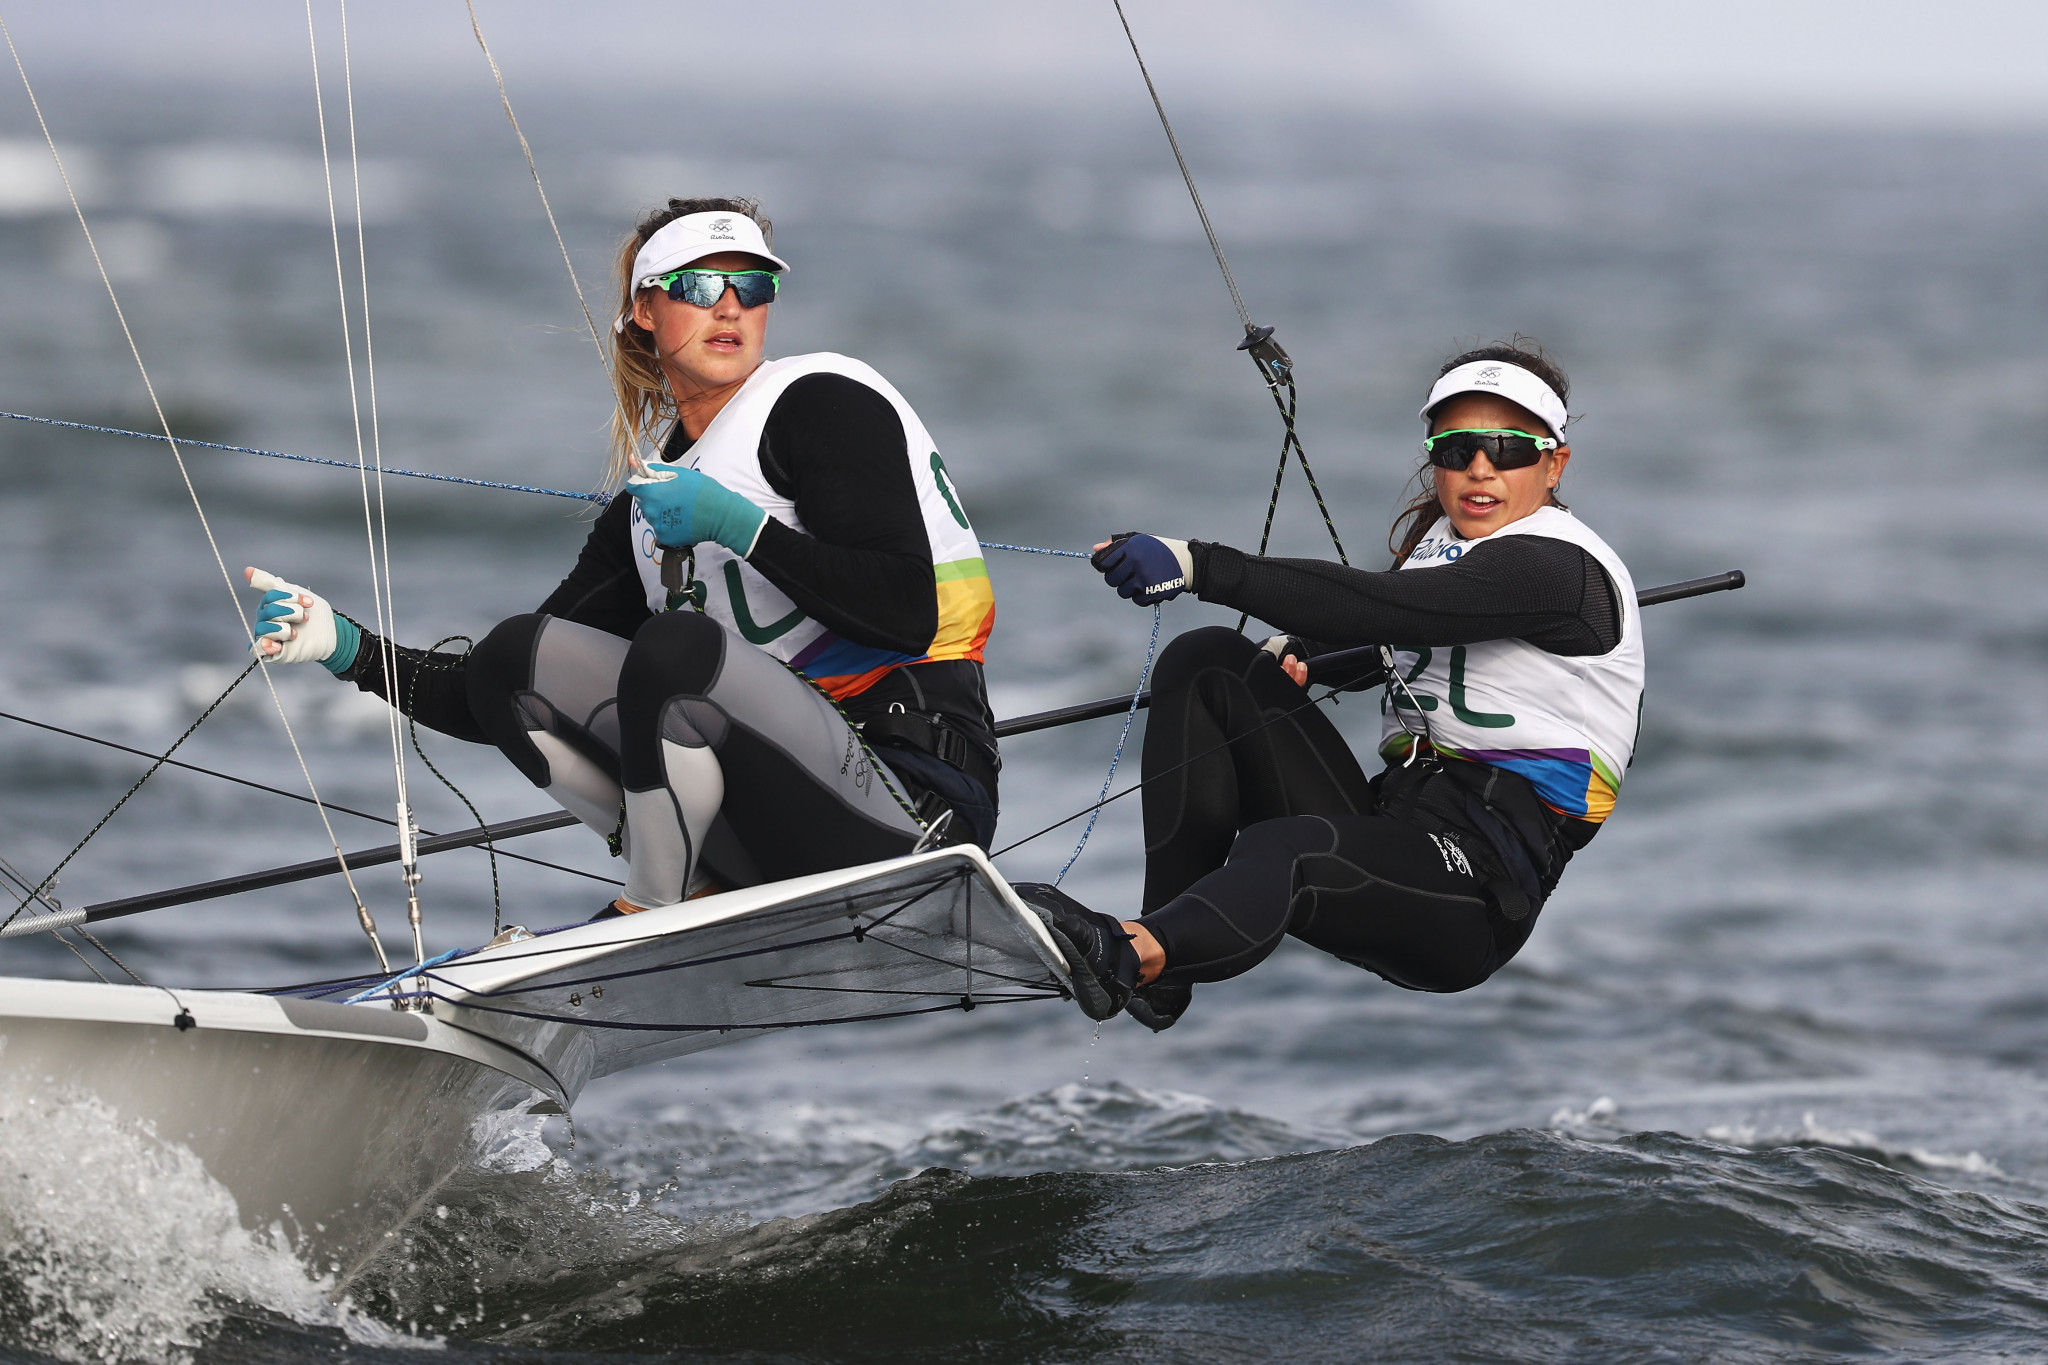 Olympic champions Grael and Kunze extend lead at 49erFX European Championships 